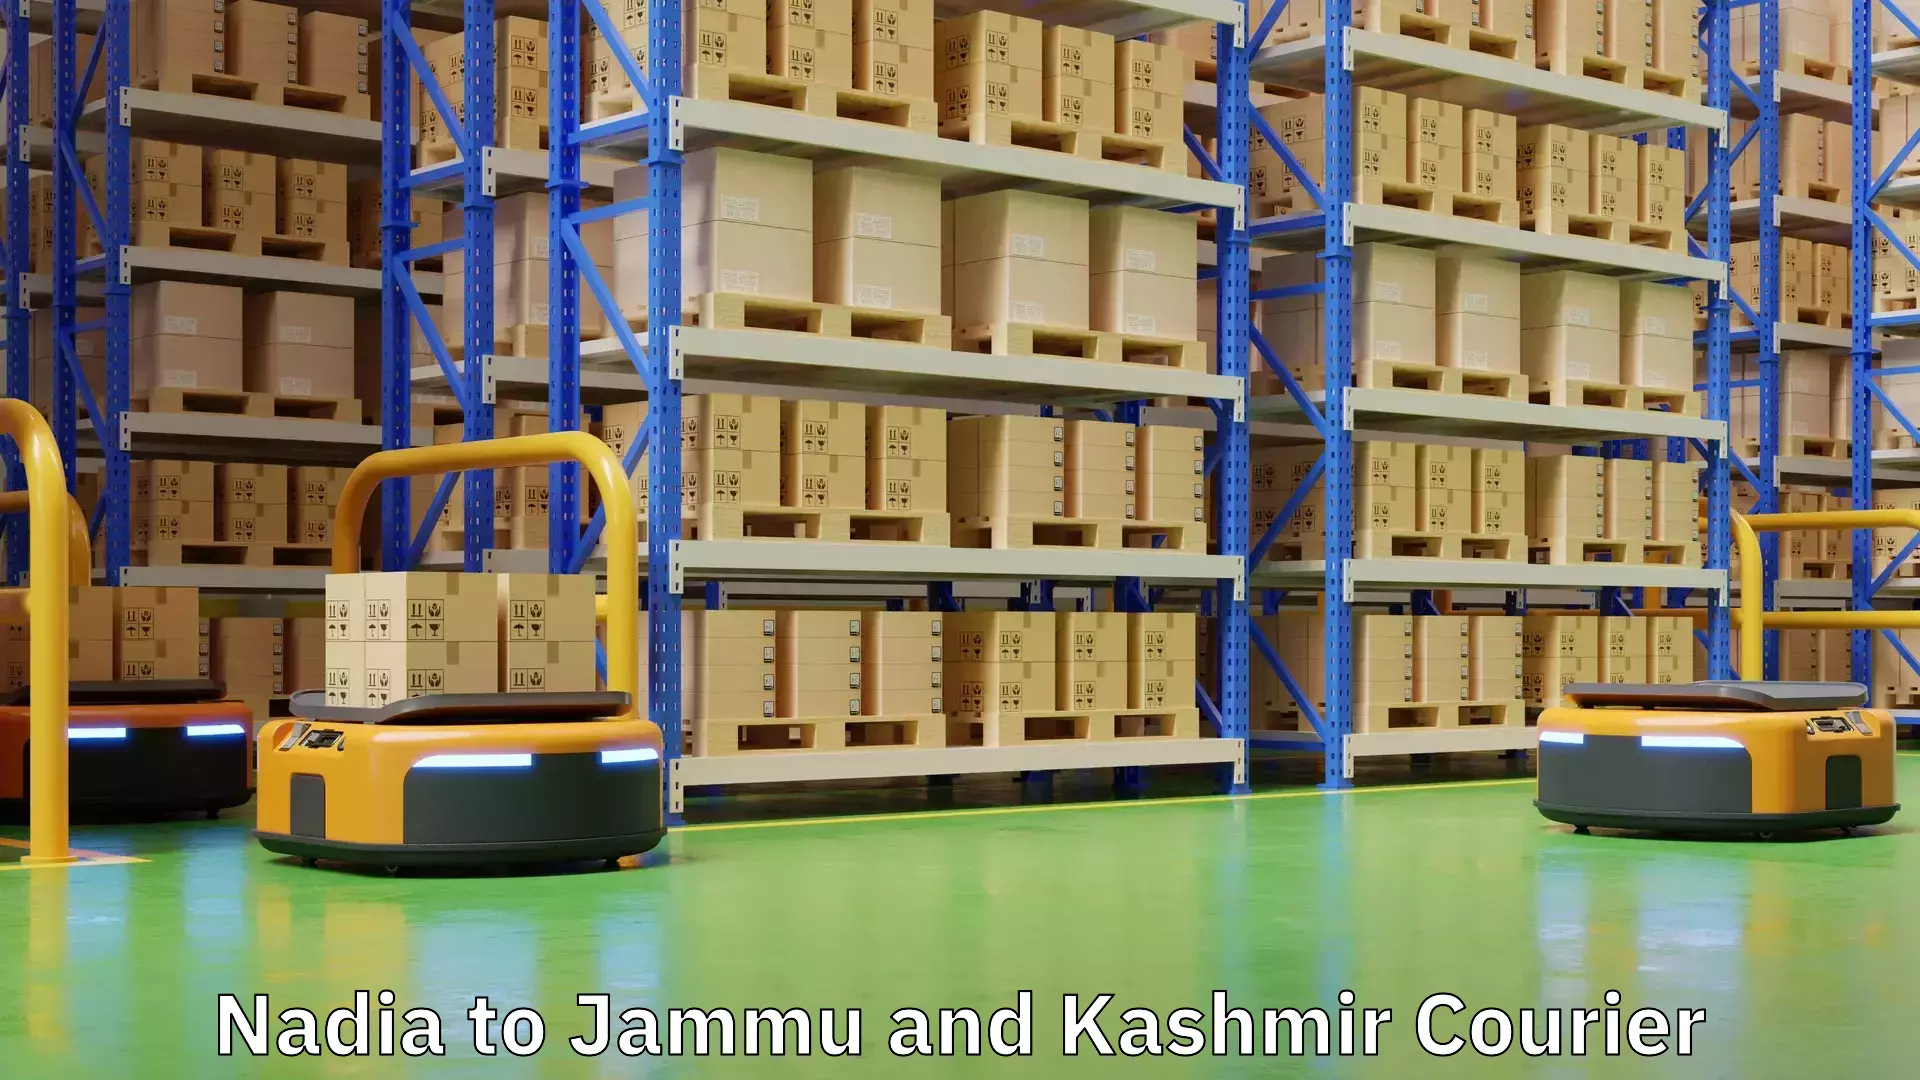 Expedited shipping methods Nadia to Jammu and Kashmir